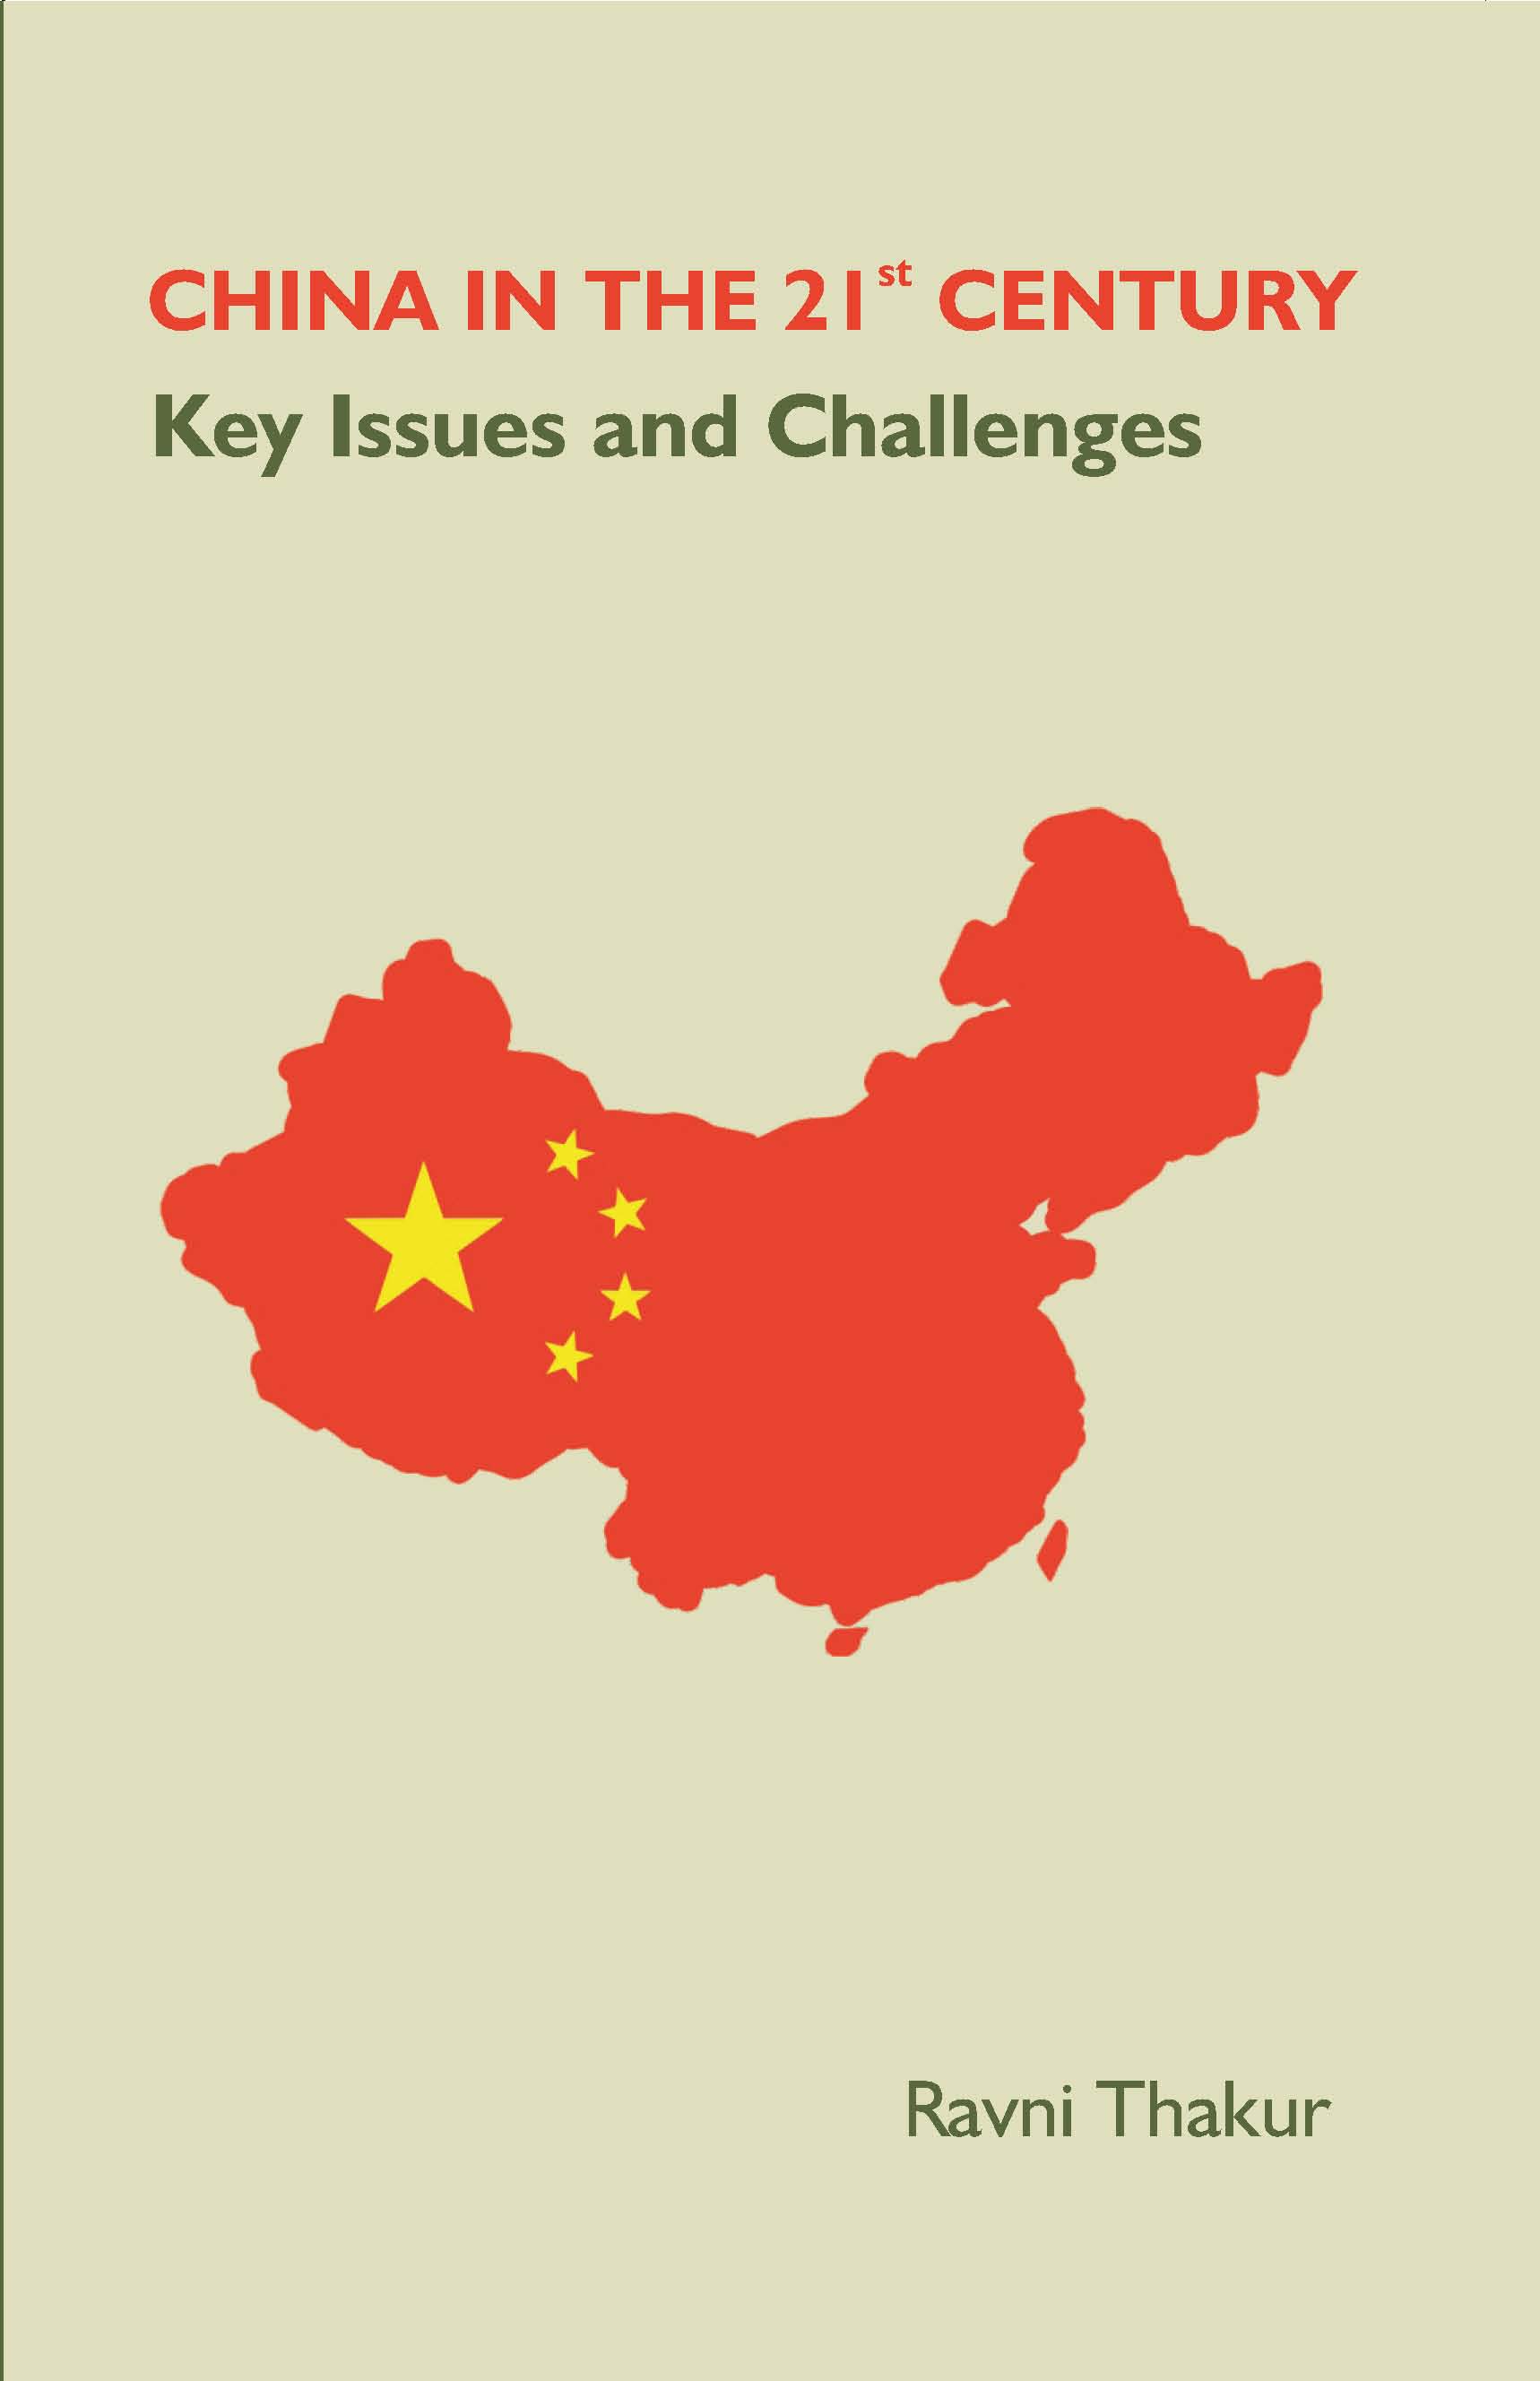 CHINA IN THE 21st CENTURY: Key Issues and Challenges  